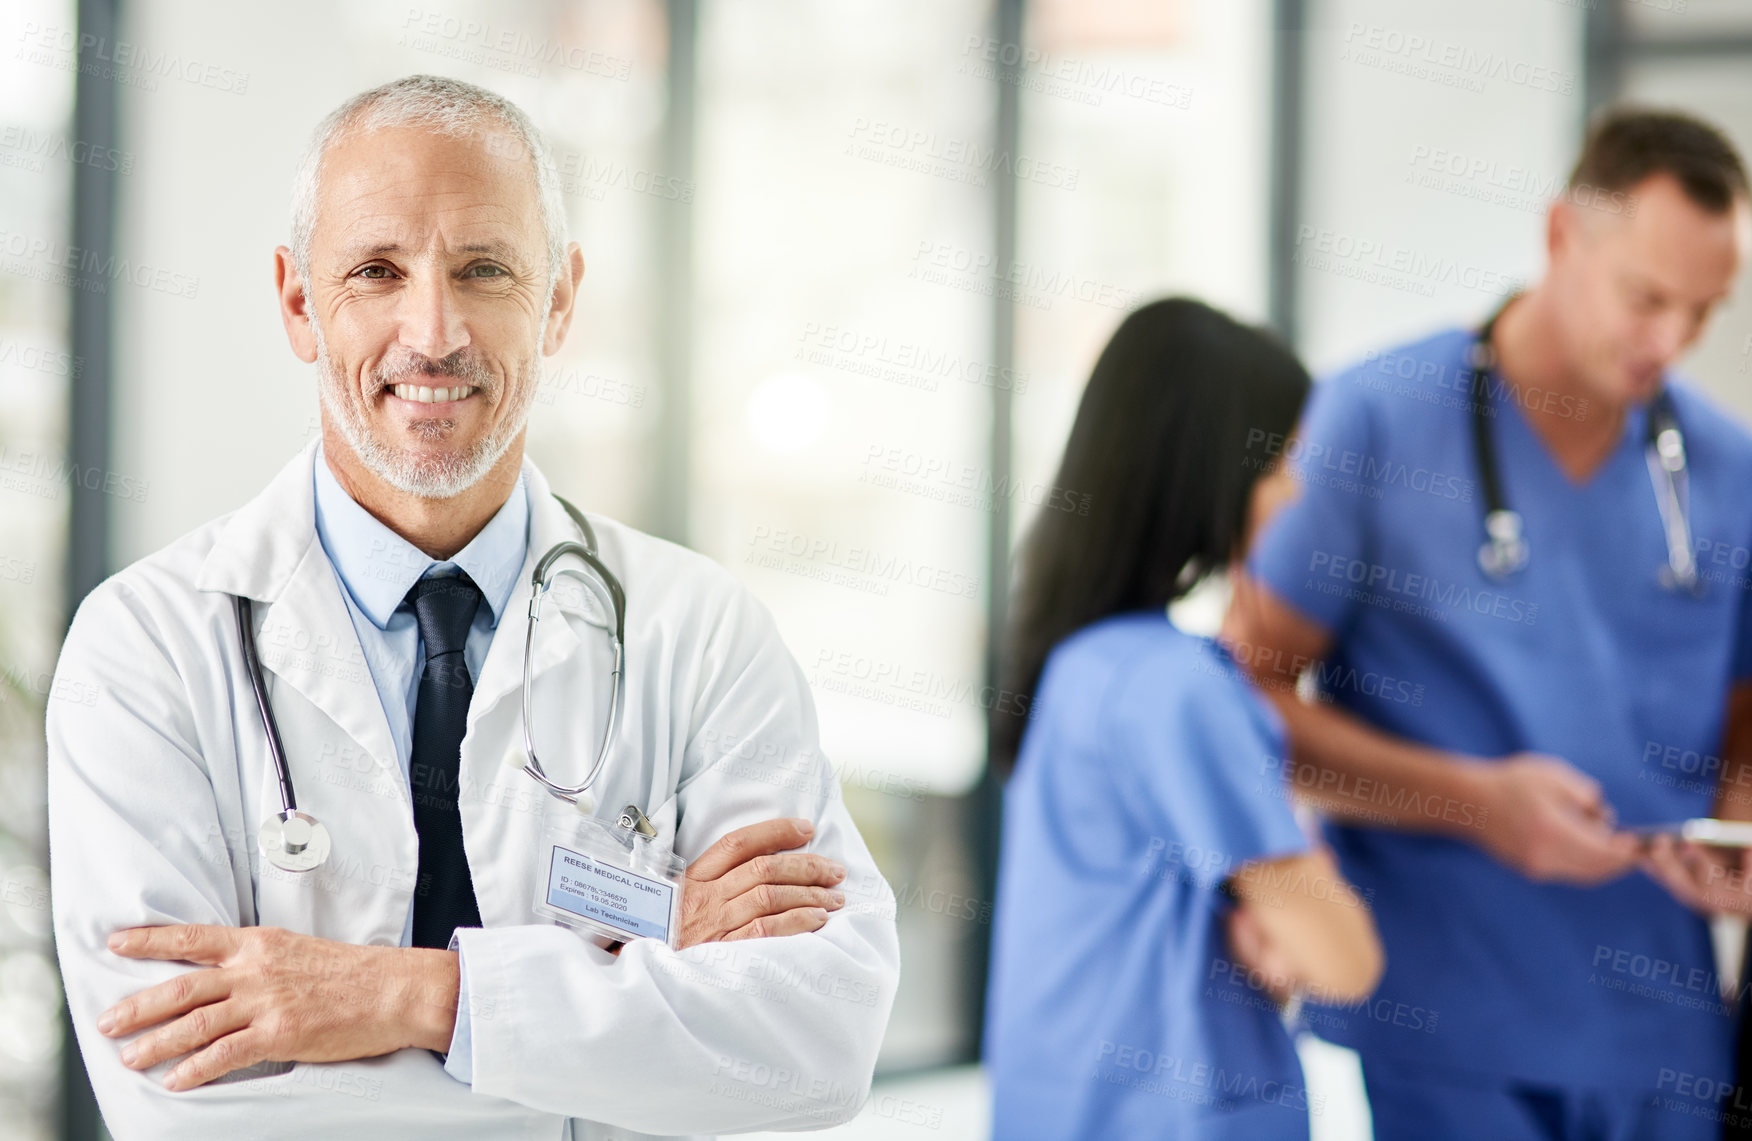 Buy stock photo Healthcare, smile and portrait of senior doctor with arms crossed, pride and support in hospital. Health care, happiness and expert medicine, confident and happy man, medical professional in clinic.